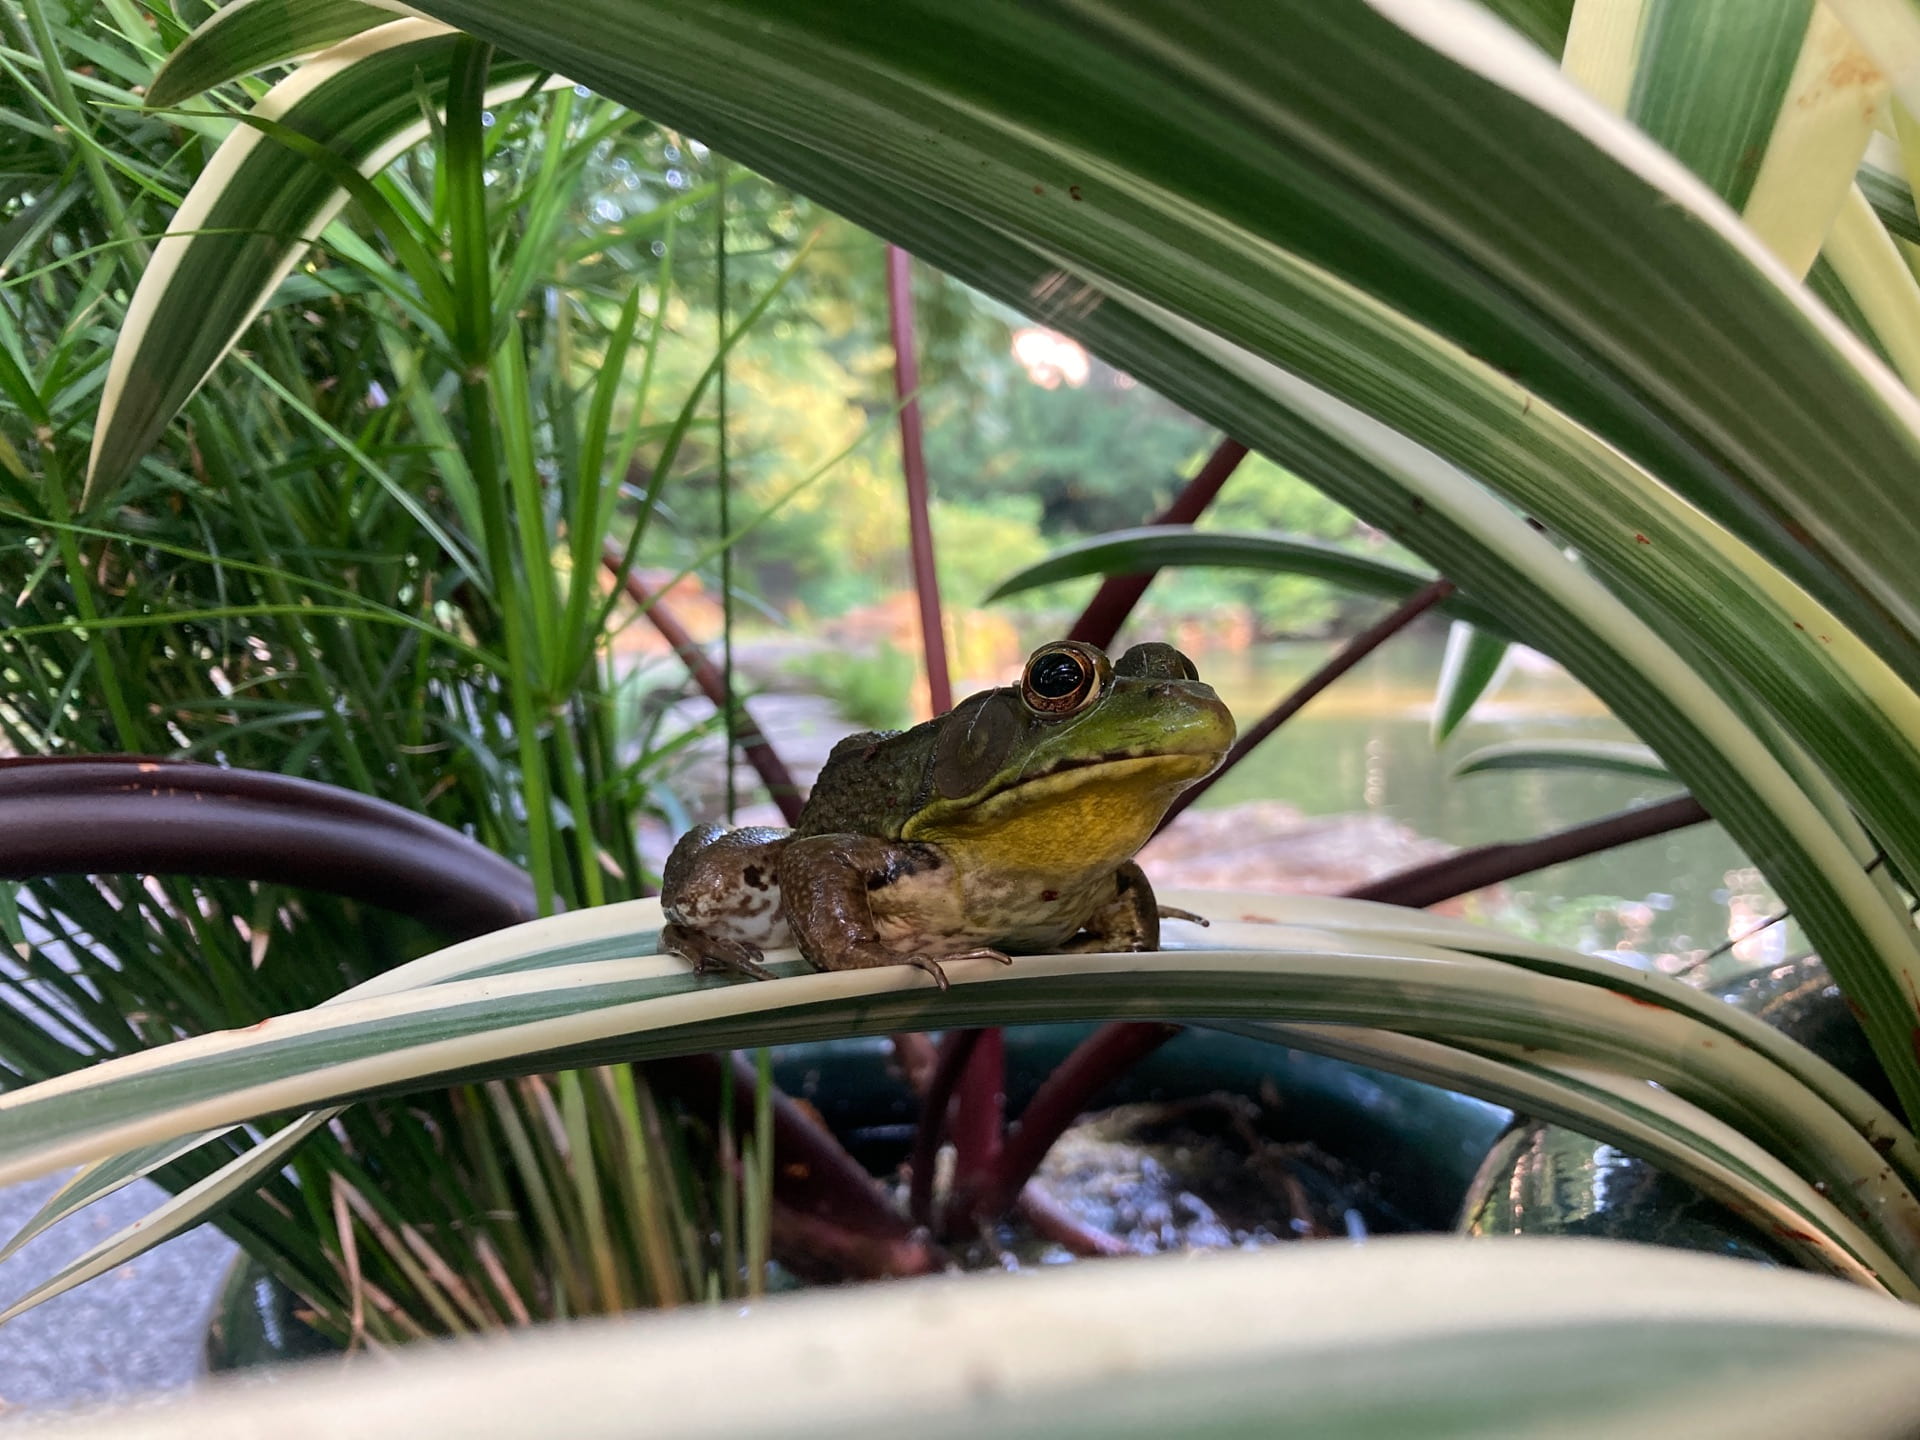 A young green frog, Lithobates clamitans, sits on top of a Caribbean spider lily leaf.